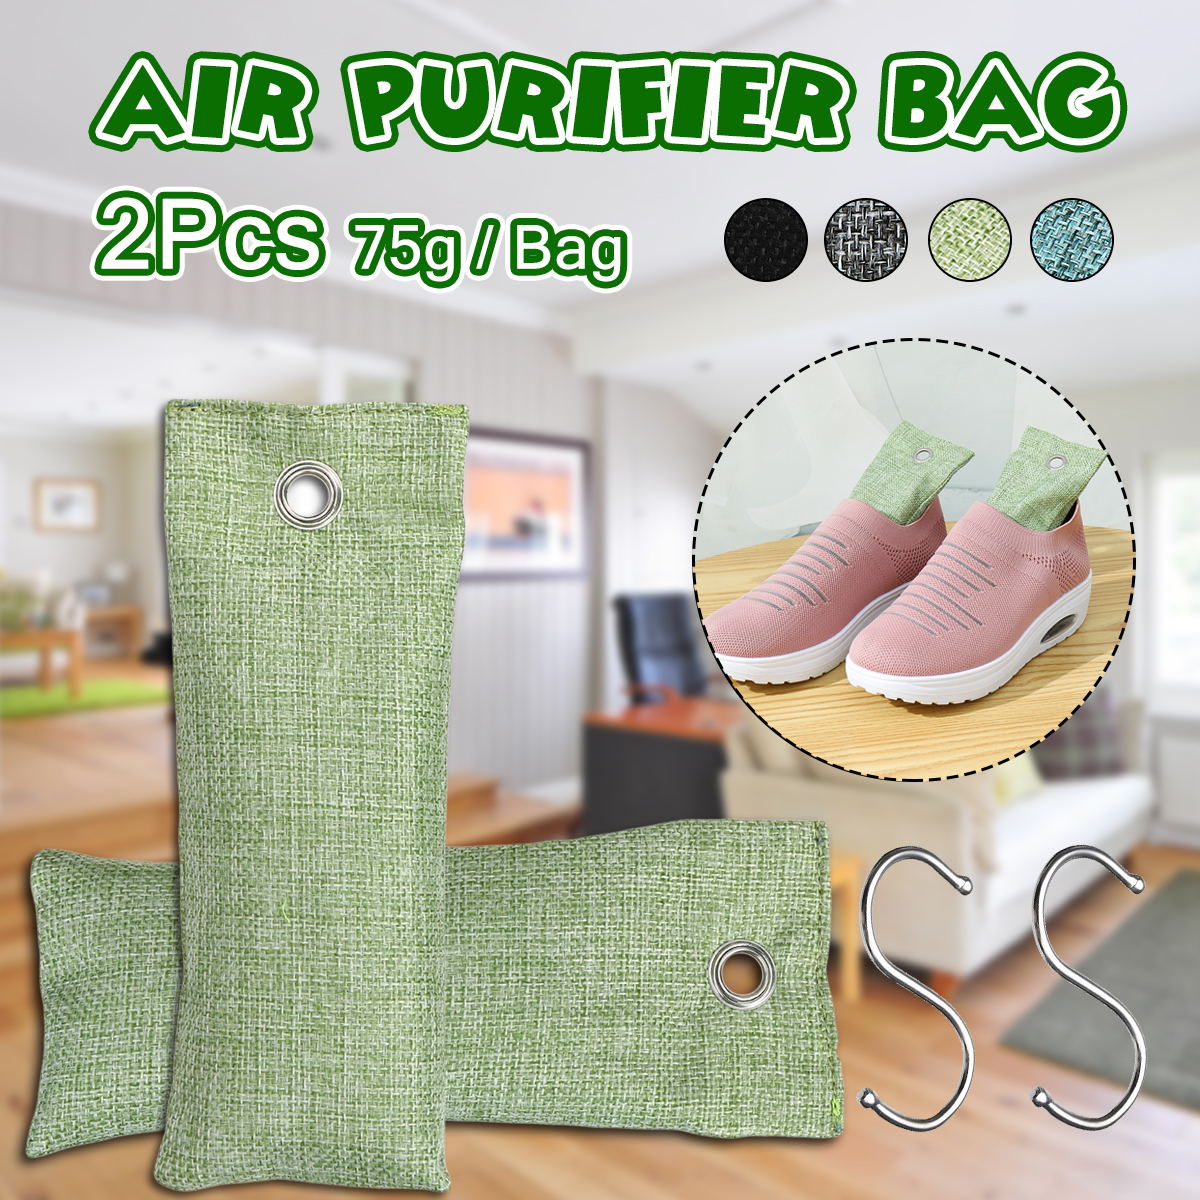 2x-Air-Purifier-Bag-Bamboo-Charcoal-Fresher-Shoes-Mold-Odor-Remover-House-Car-Purifying-Bag-1627507-2